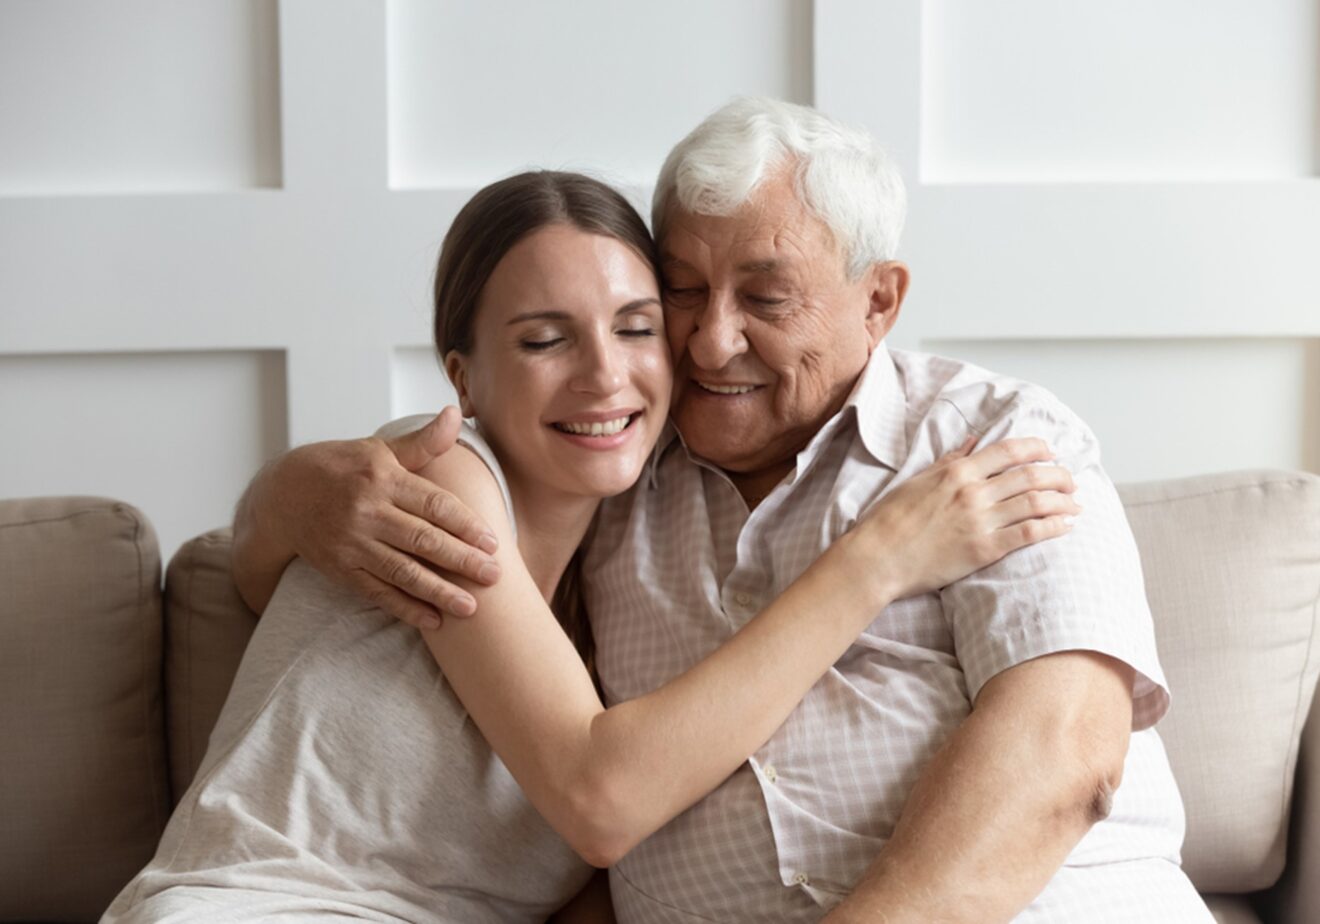 A young woman and an elderly man embrace warmly, smiling as they sit closely on a sofa in a neutrally decorated room with optimal air quality, expressing love and comfort.